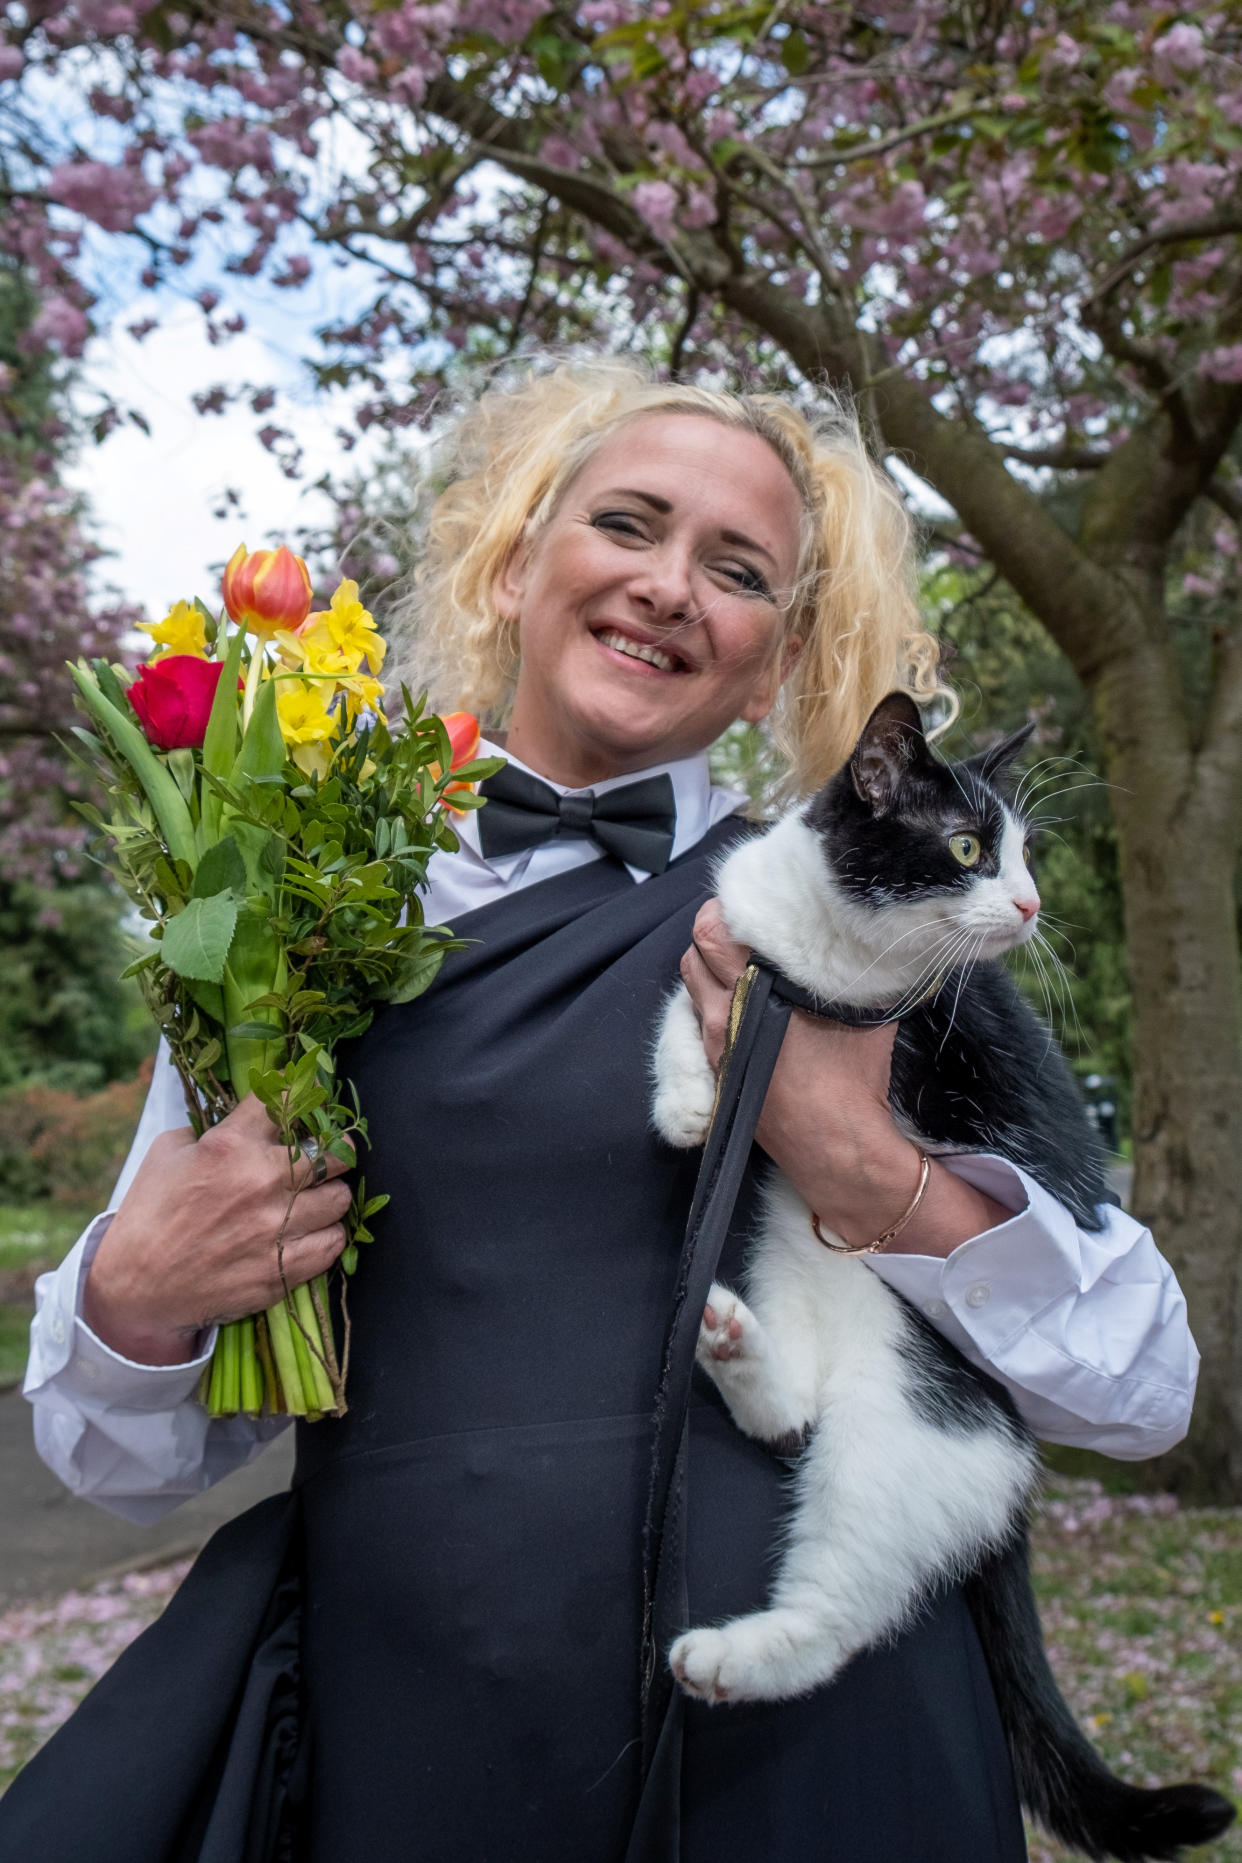 Deborah wore a tuxedo for her nuptials with cat India. (SWNS)